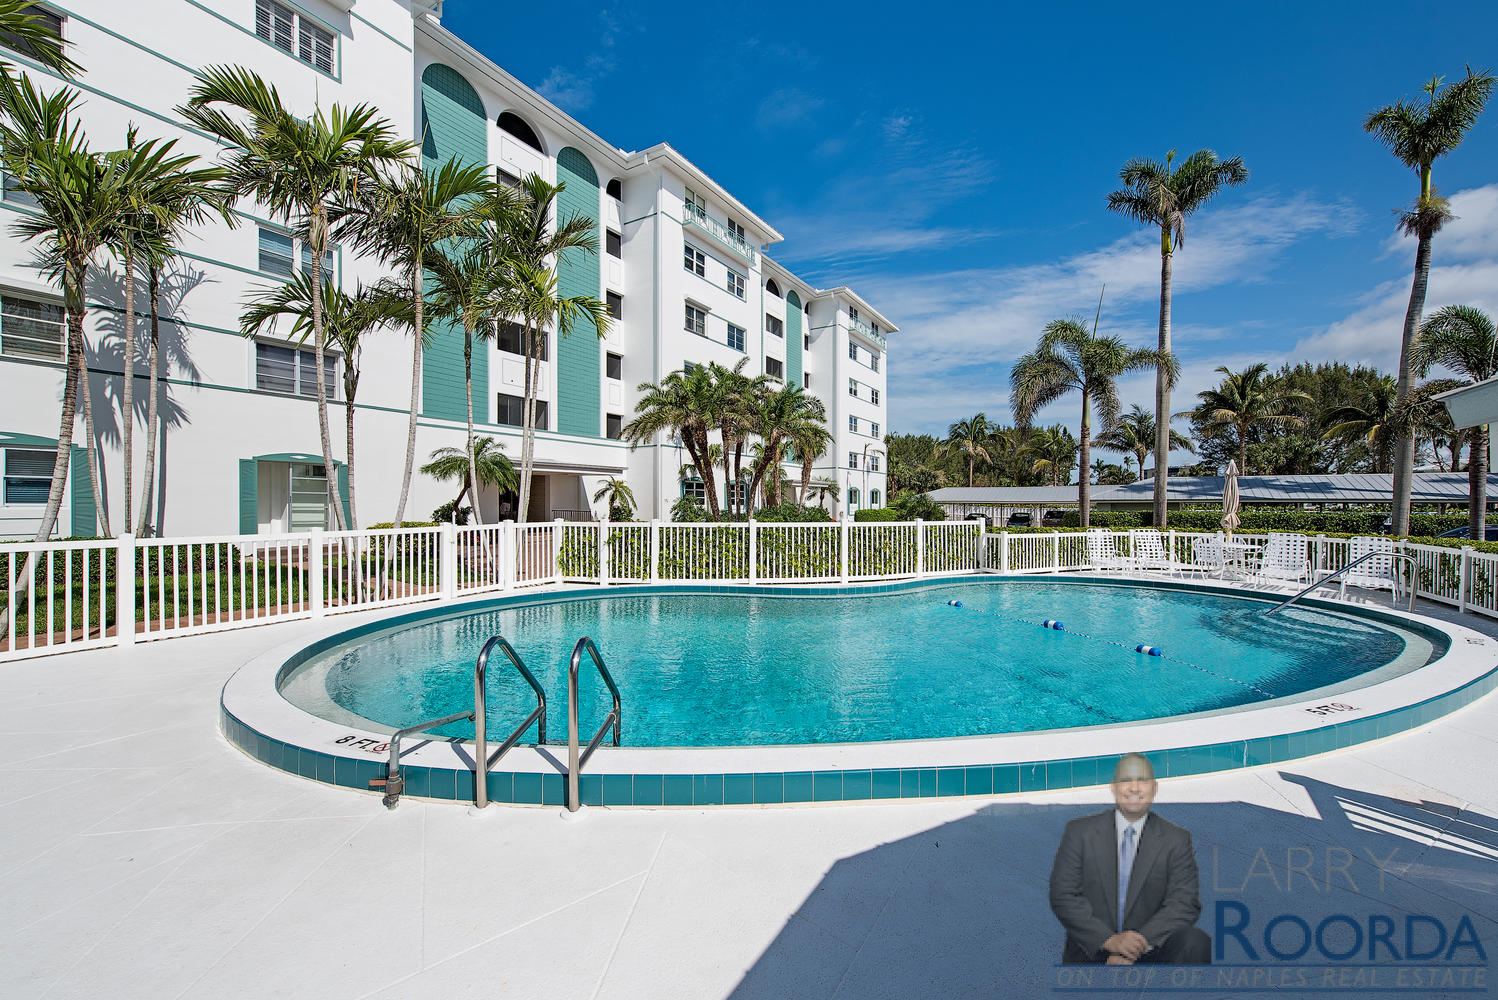 Carriage Club waterfront condos in Naples, FL